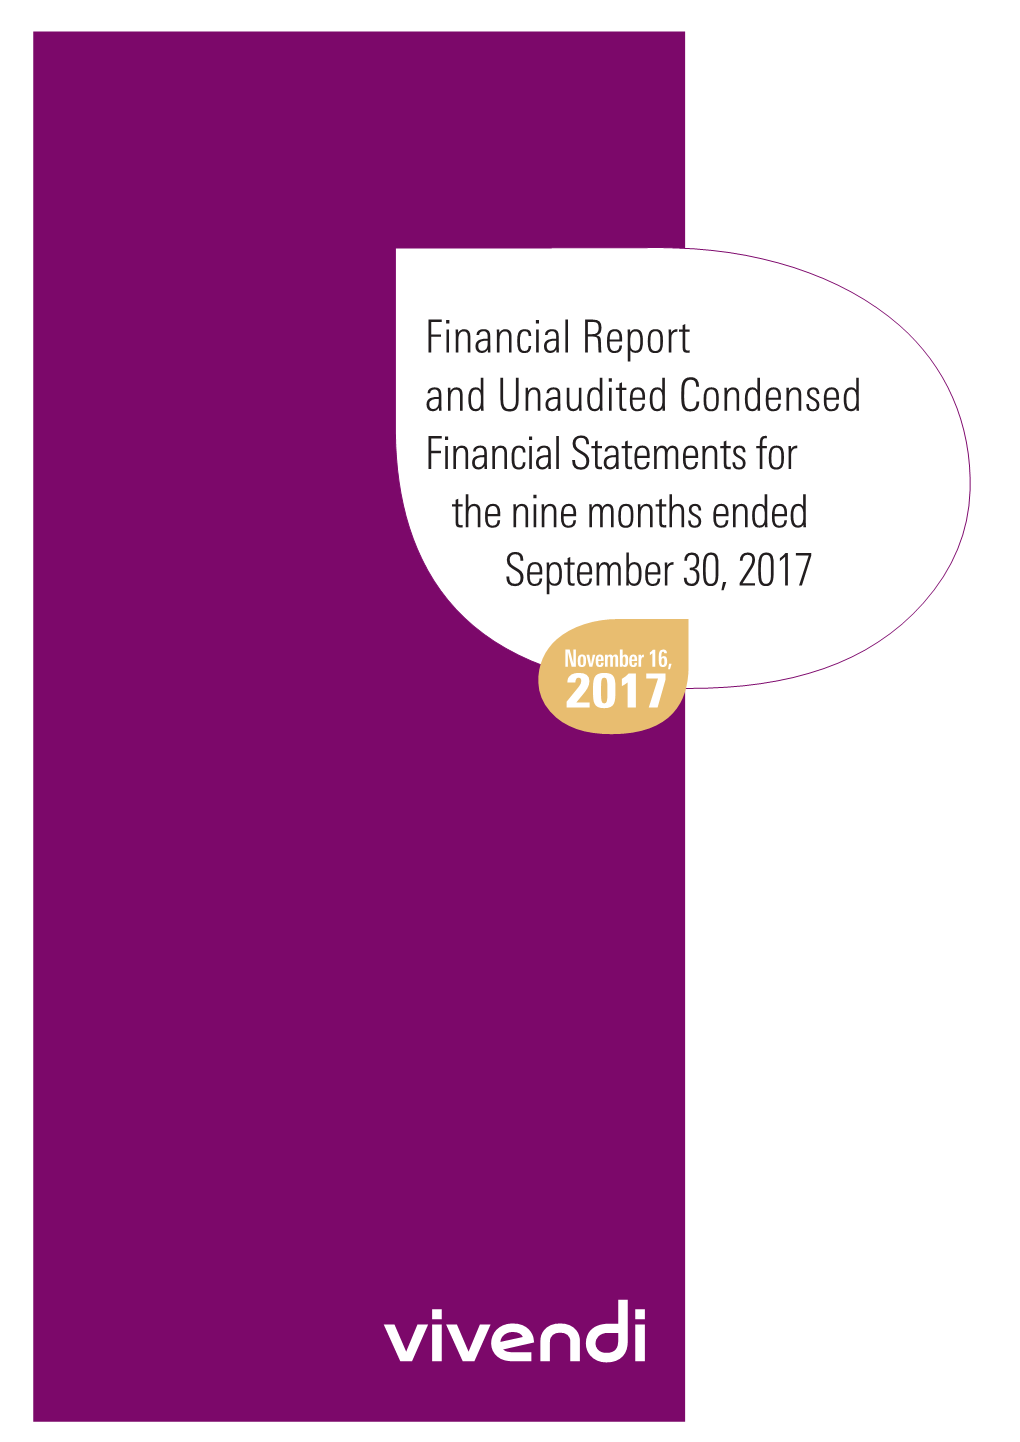 Financial Report and Unaudited Condensed Financial Statements for the Nine Months Ended September 30, 2017